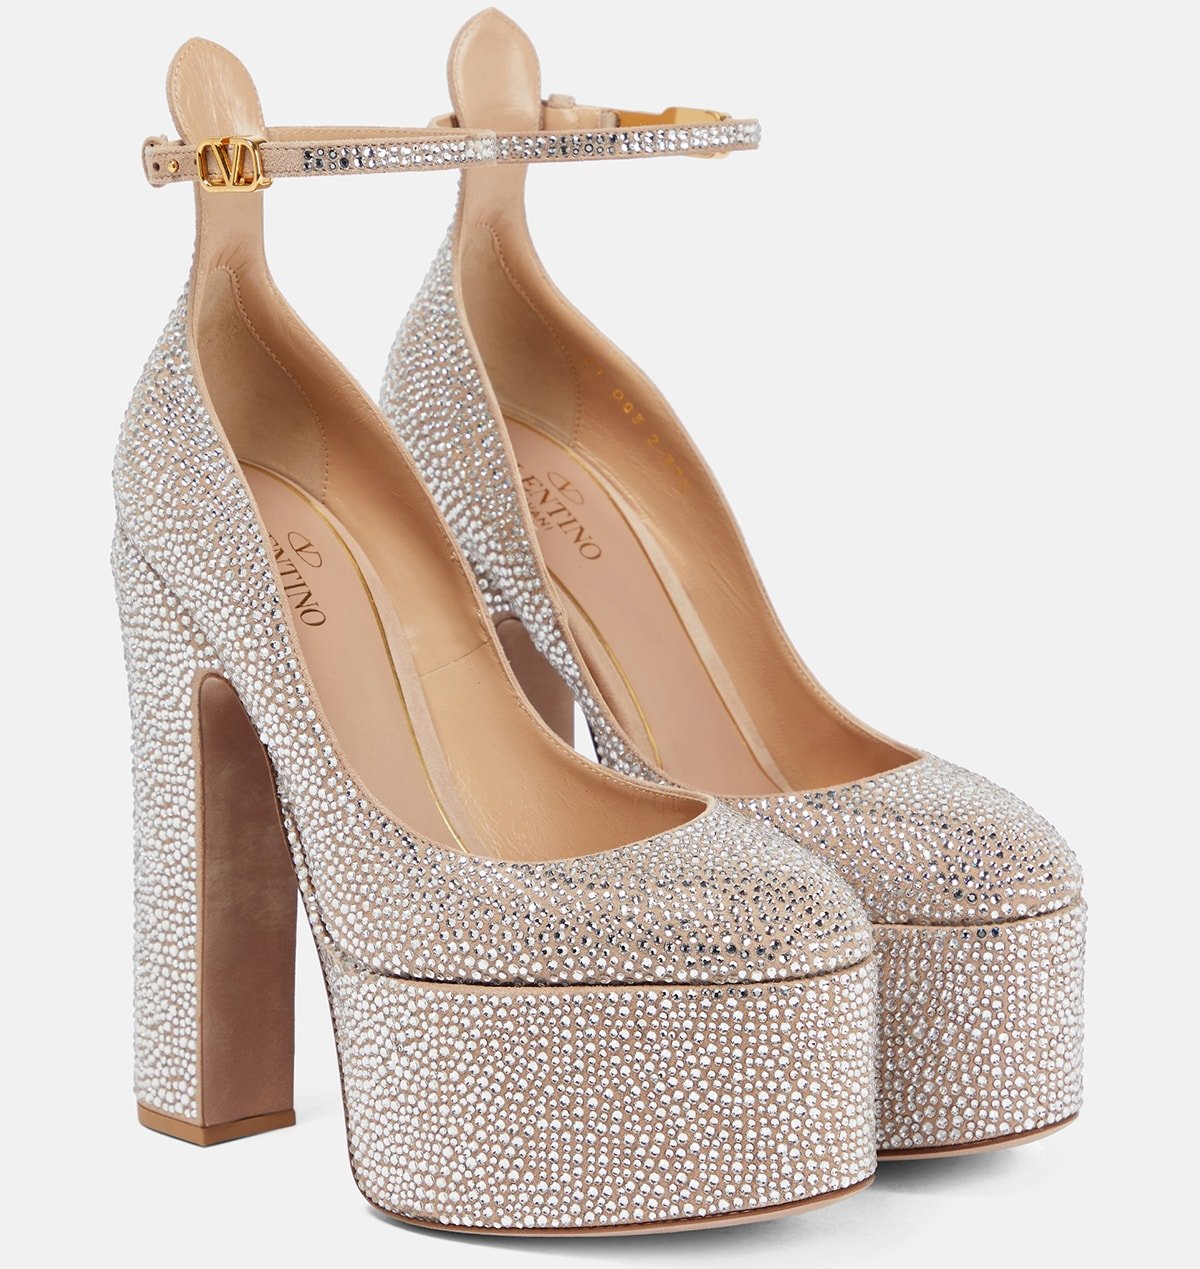 These Tan-Go pumps are embellished with crystals from the ankle straps down to the thick platforms and block heels